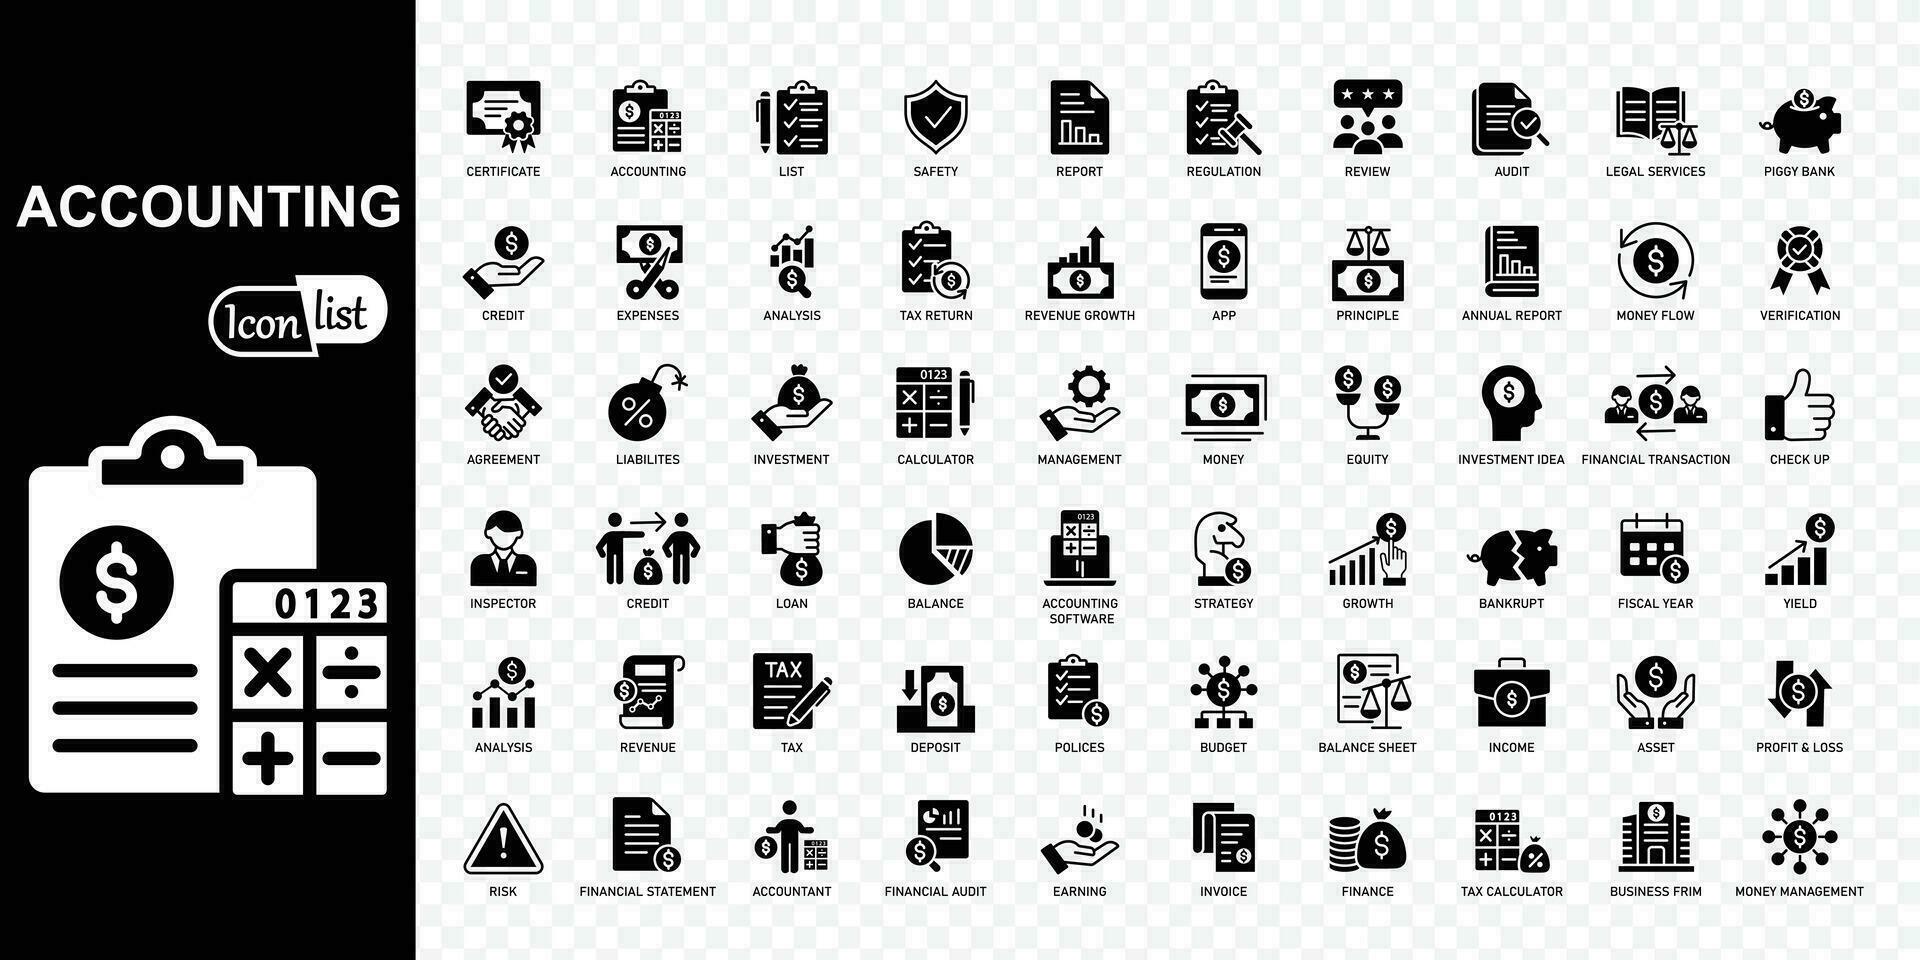 Accounting editable icons set. Accountant, financial, business firm tax, statement, calculator, and balance sheet icons . Vector illustration